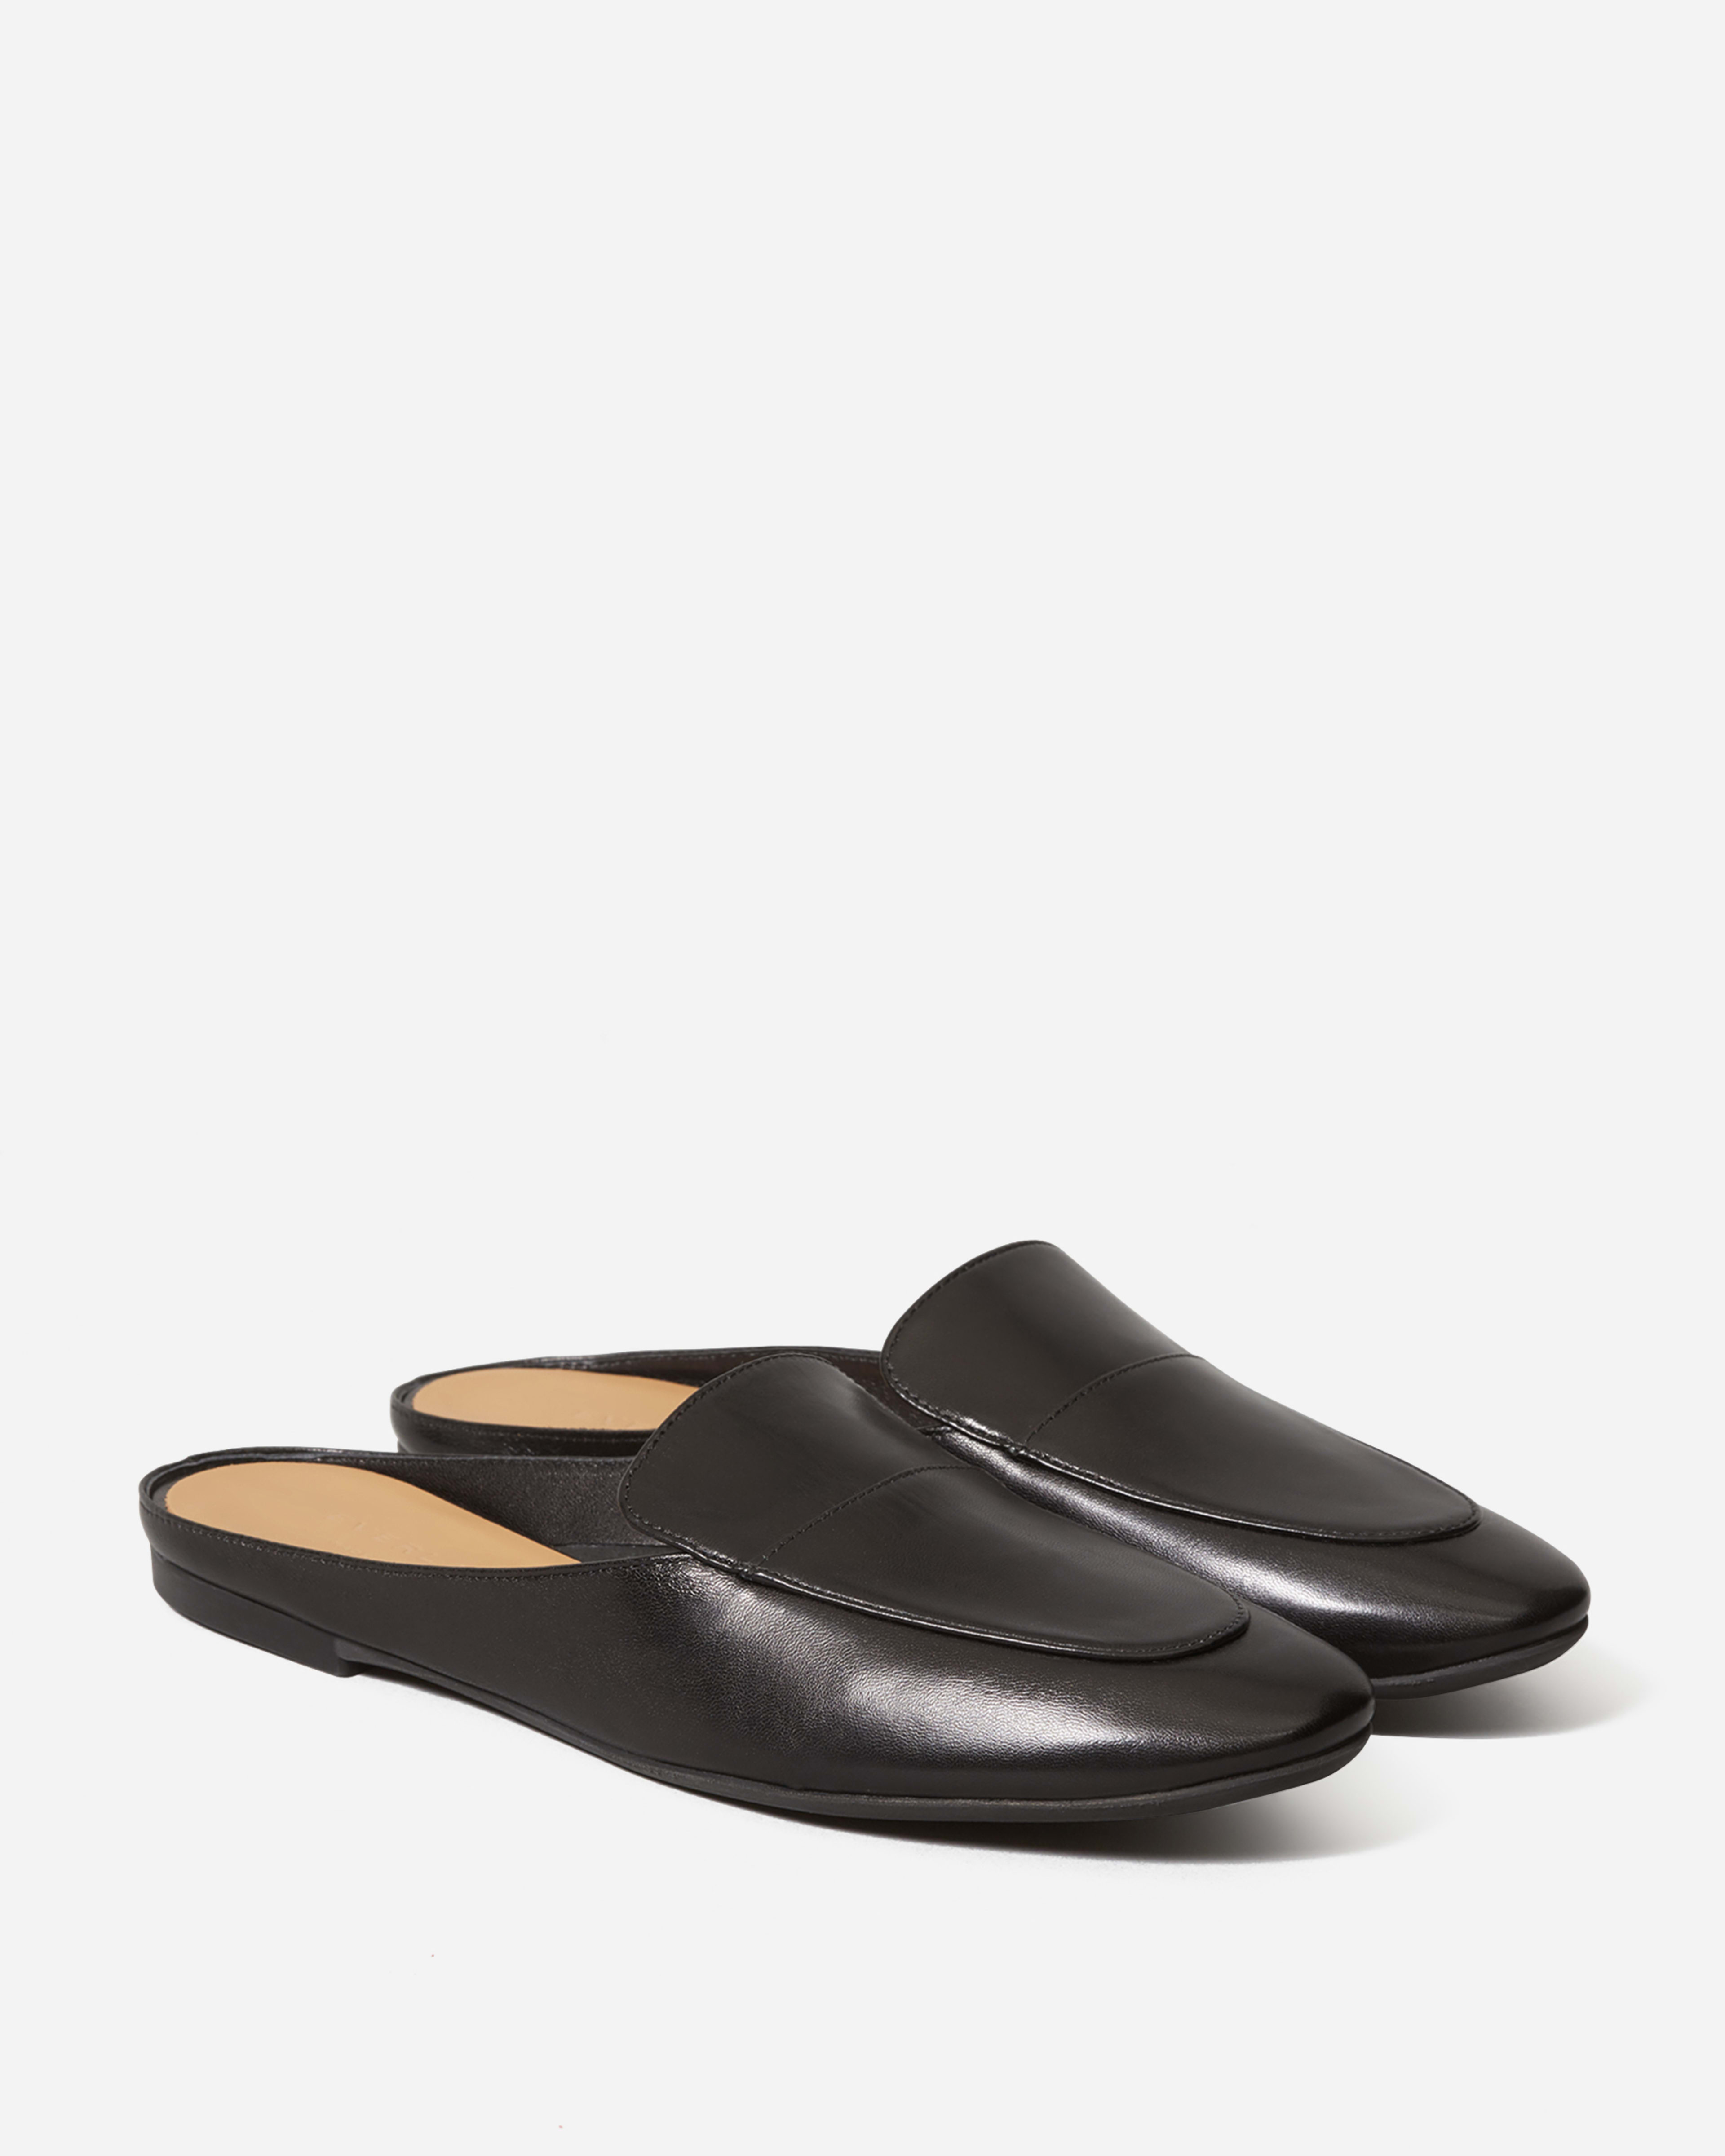 The Day Loafer Mule Black – Everlane